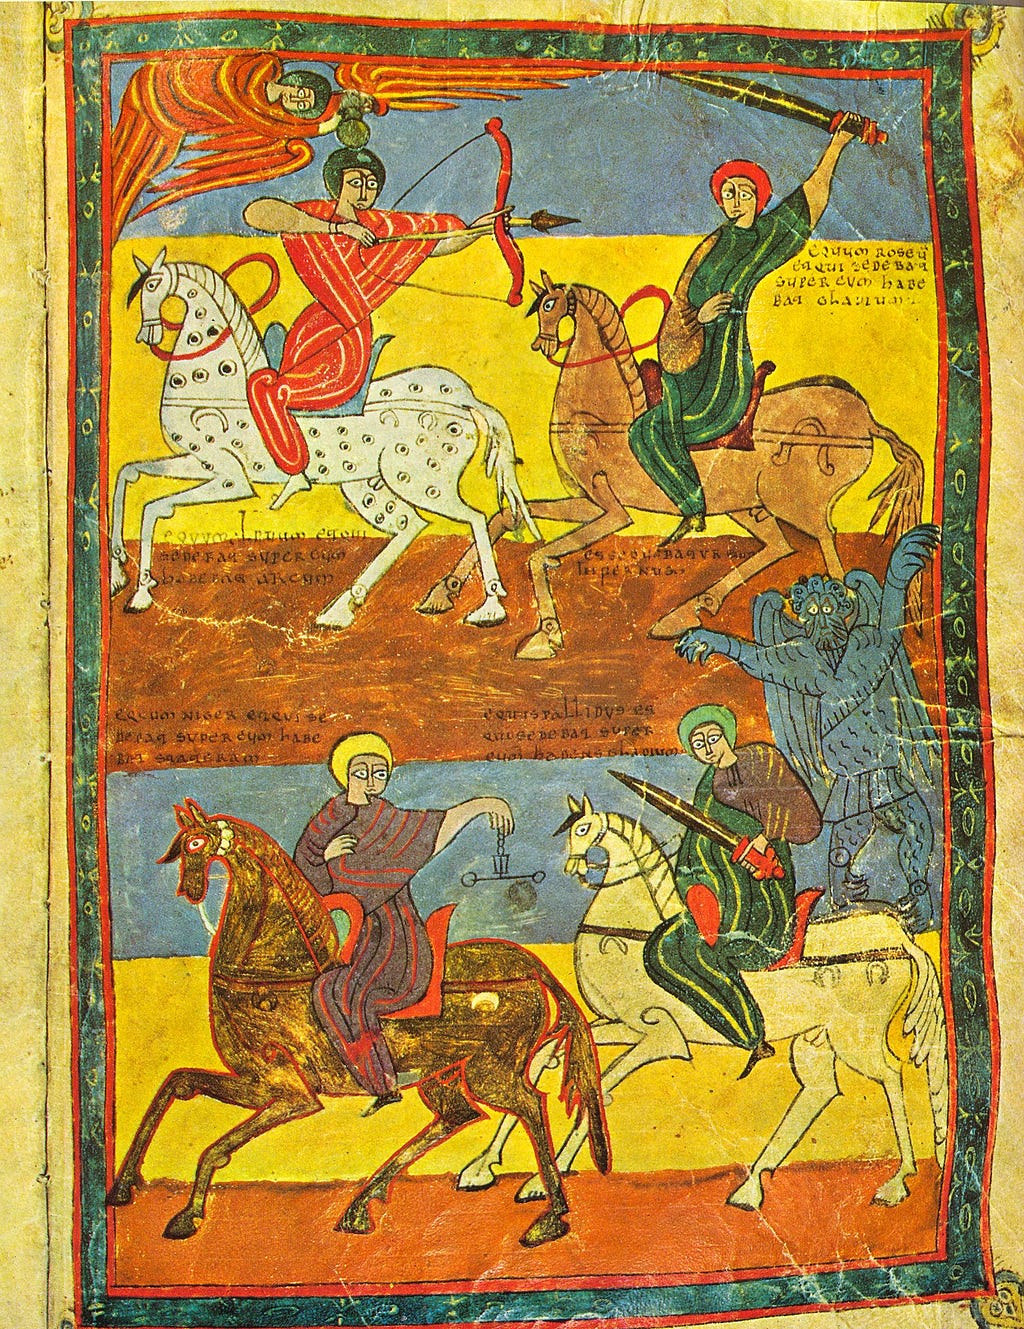 Illustration from the Beatus Valladolid (ca. 970 AD), a “Commentary on the Apocalypse”.